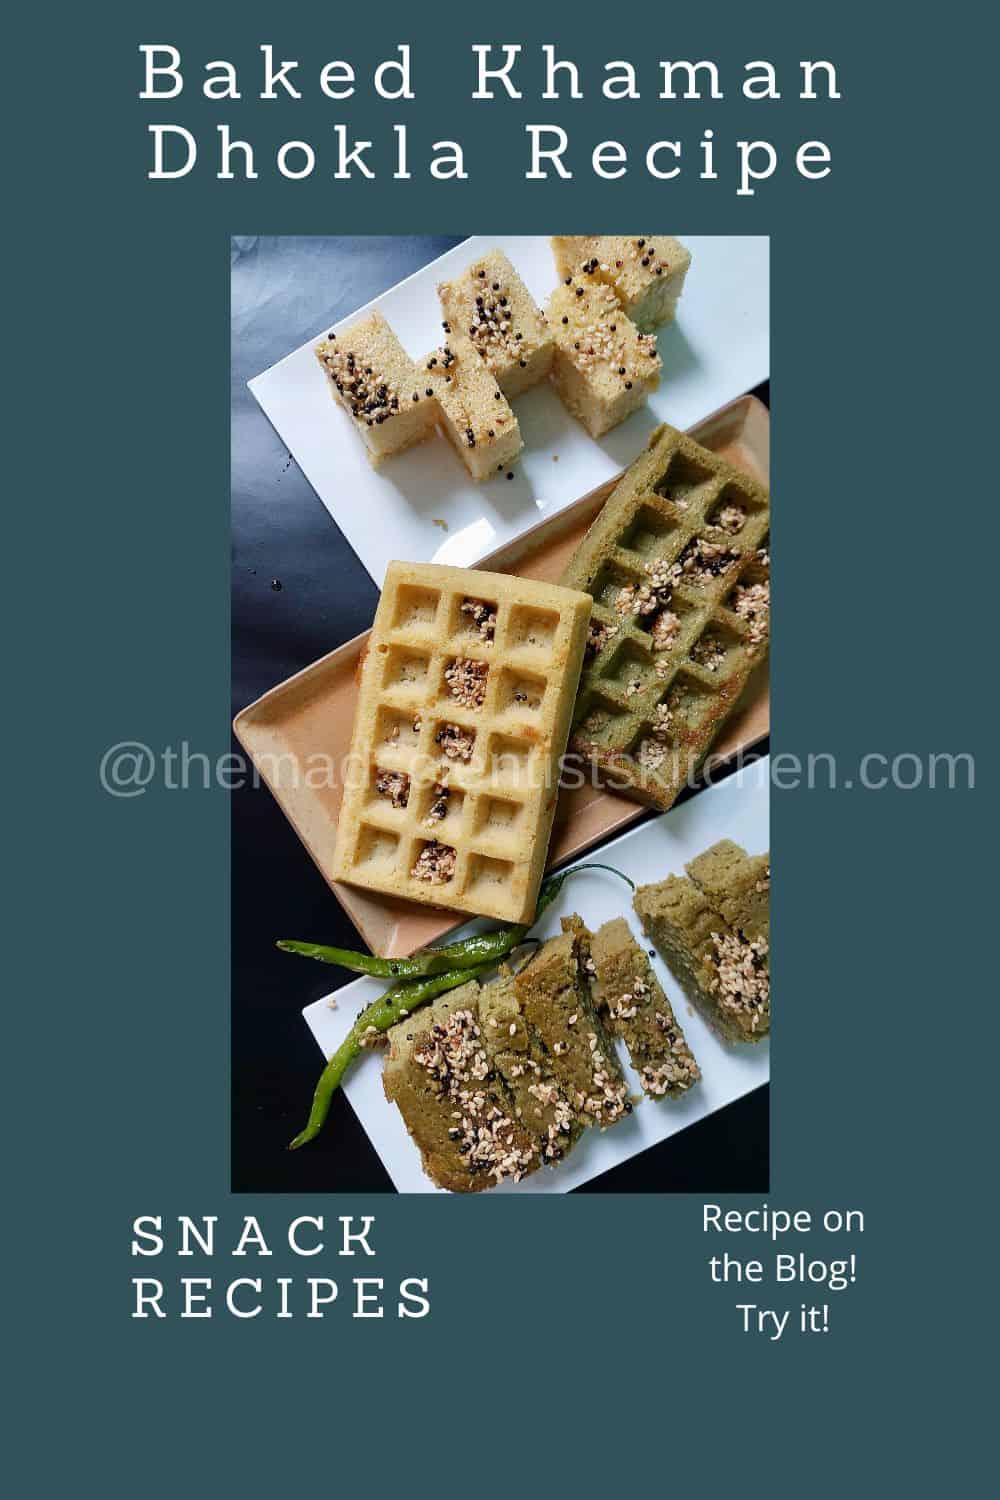 Serving Baked Khaman Dhokla along with the sprouts and spinach variant. The traditional Gujarati snack can be made into waffles too.